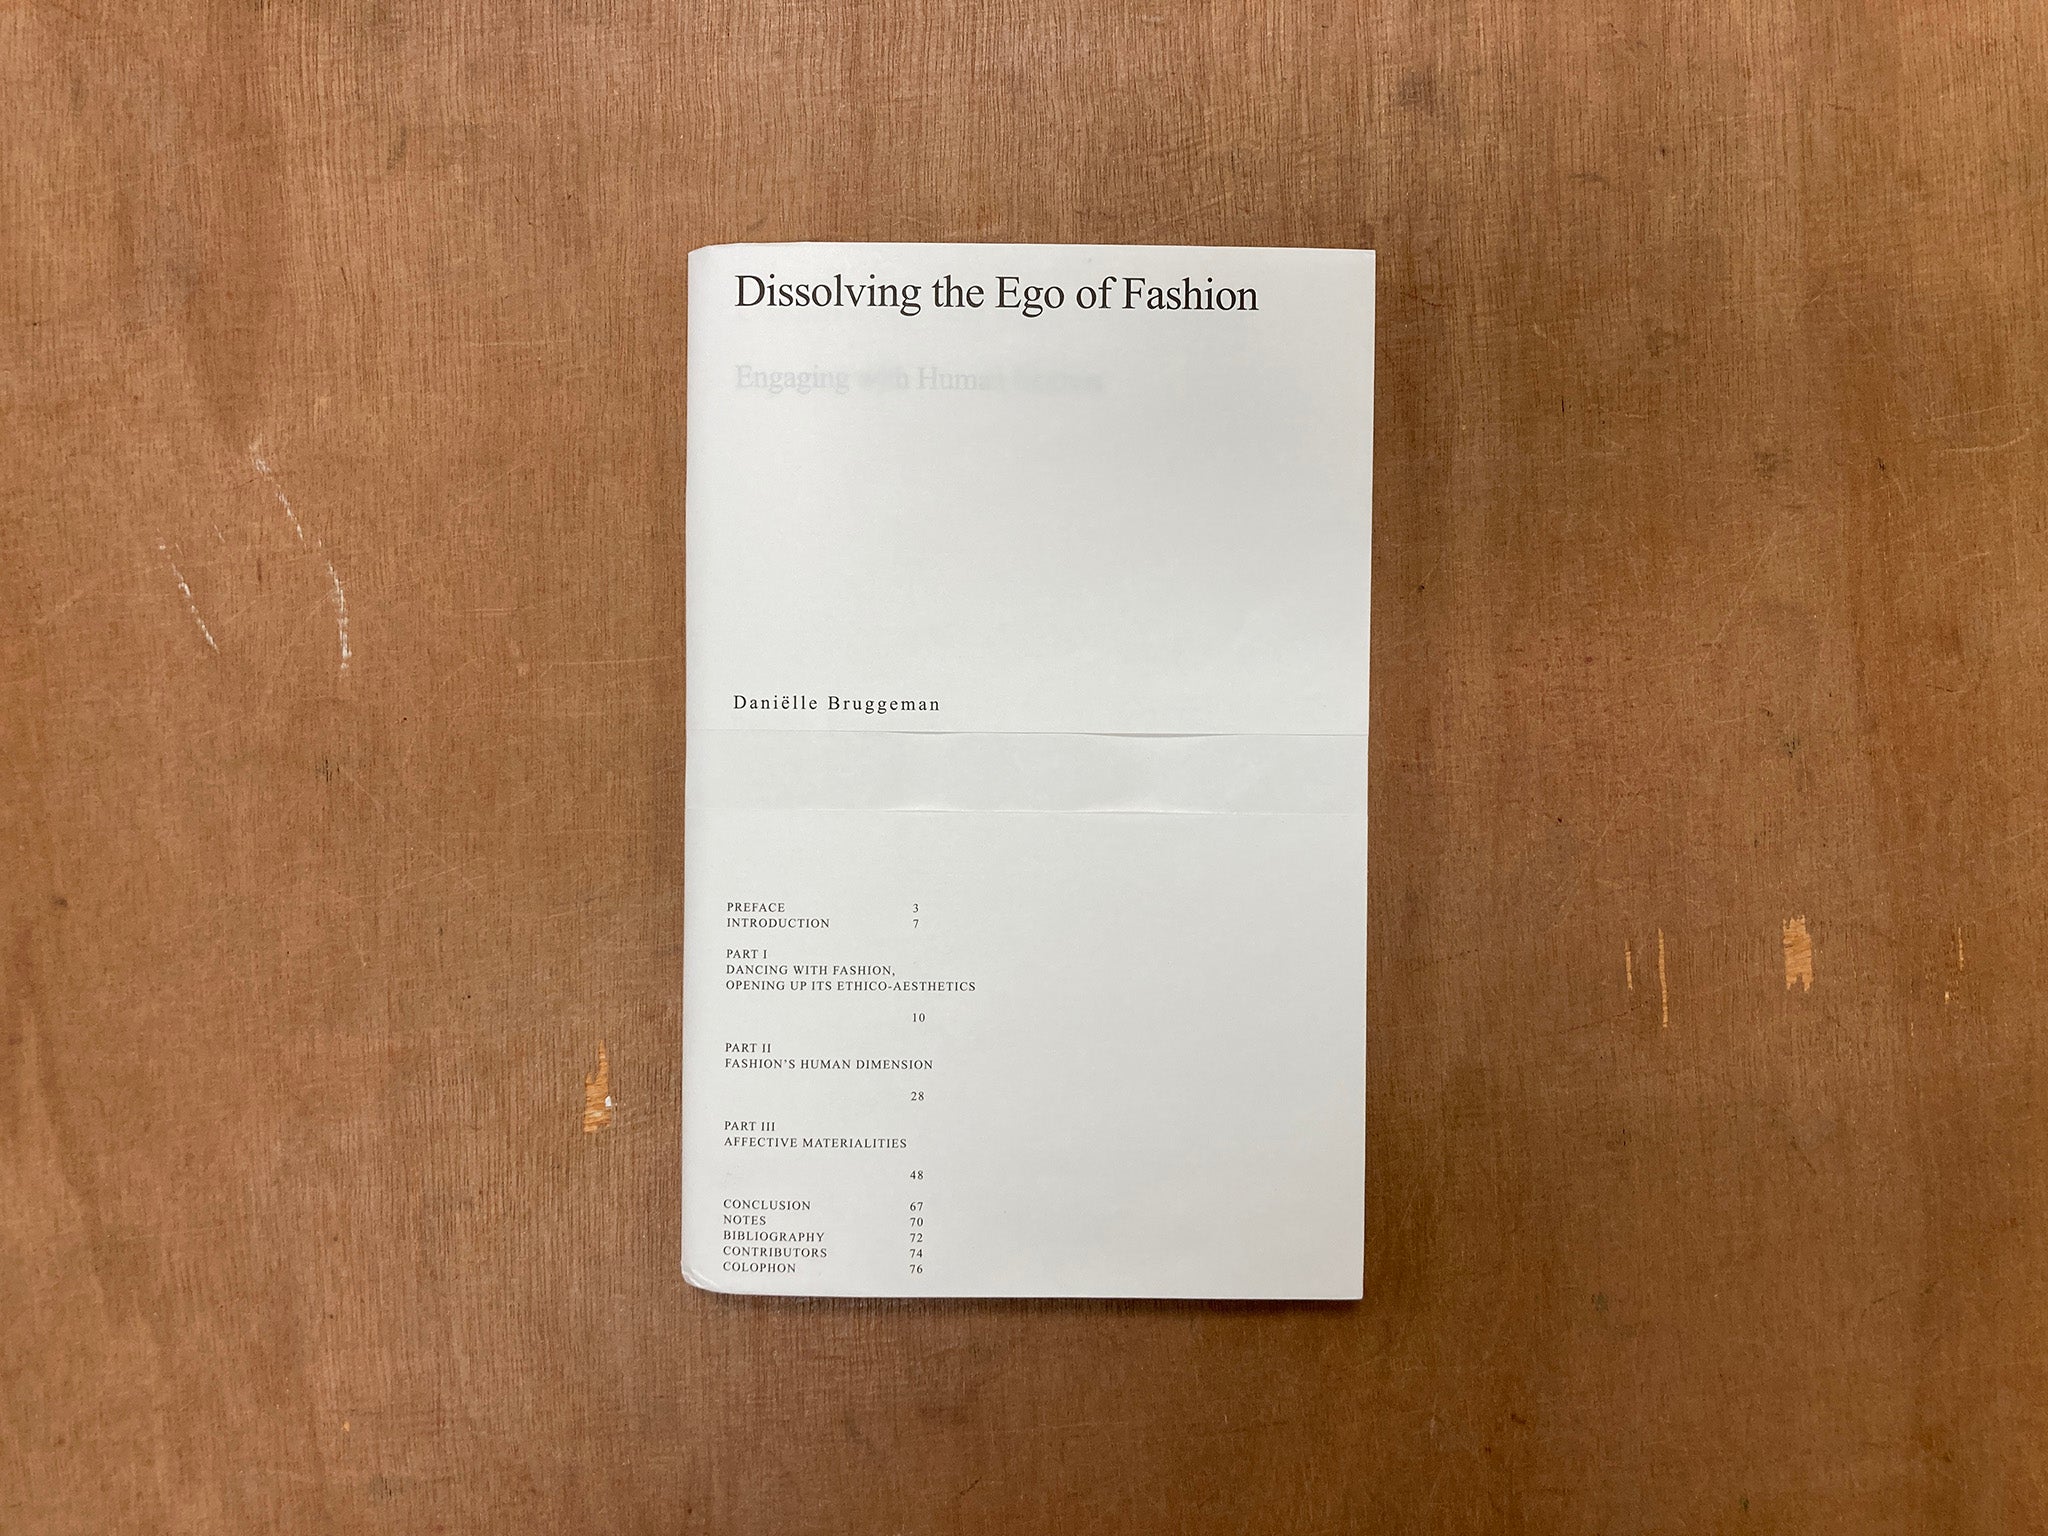 DISSOLVING THE EGO OF FASHION: ENGAGING WITH HUMAN MATTERS by Daniëlle Bruggeman